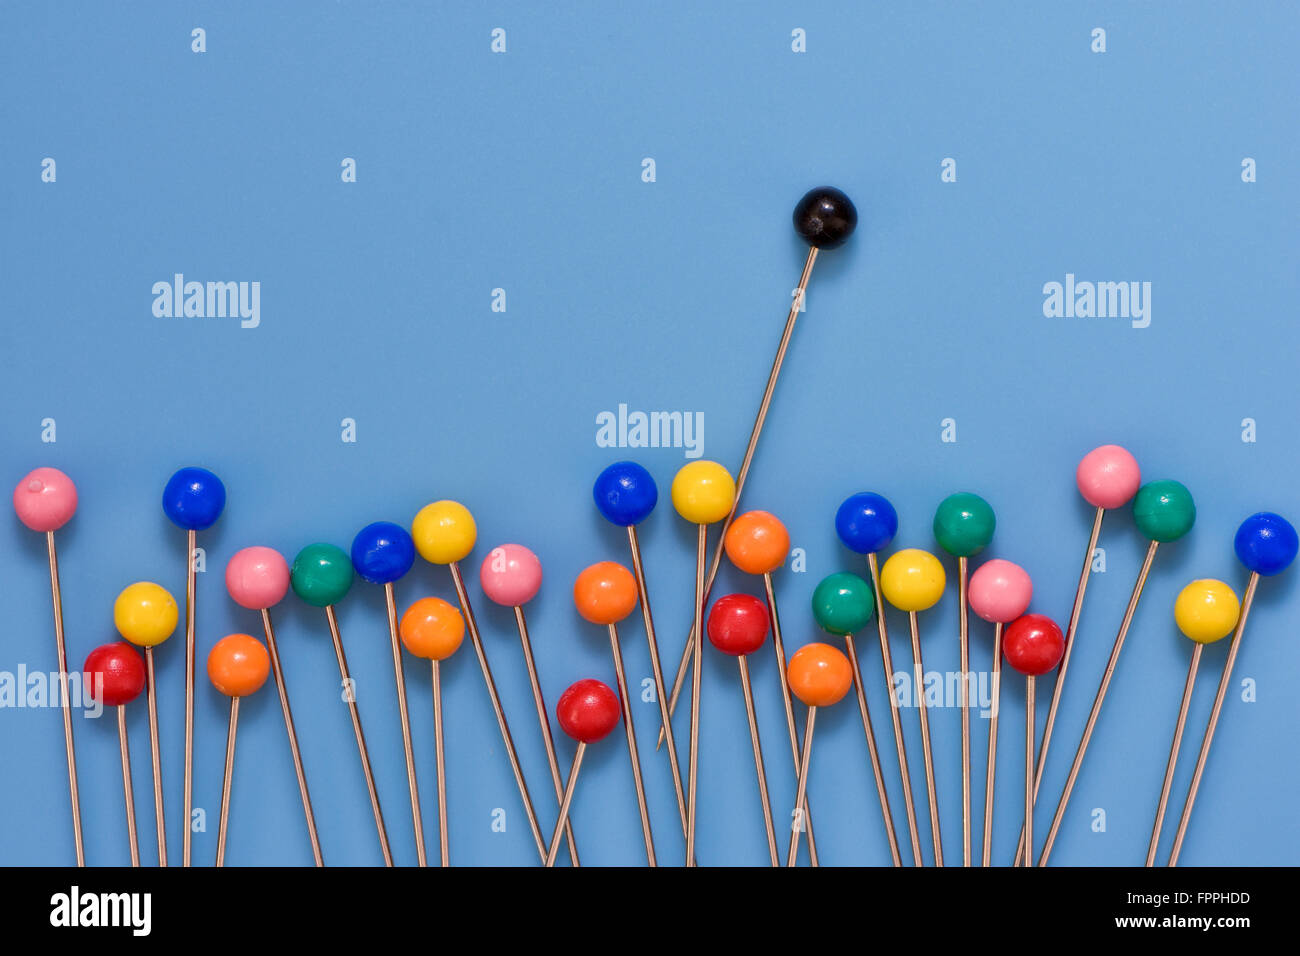 Colourful berry pins on blue background with odd black pin sticking out showing concept of standing out from the crowd Stock Photo